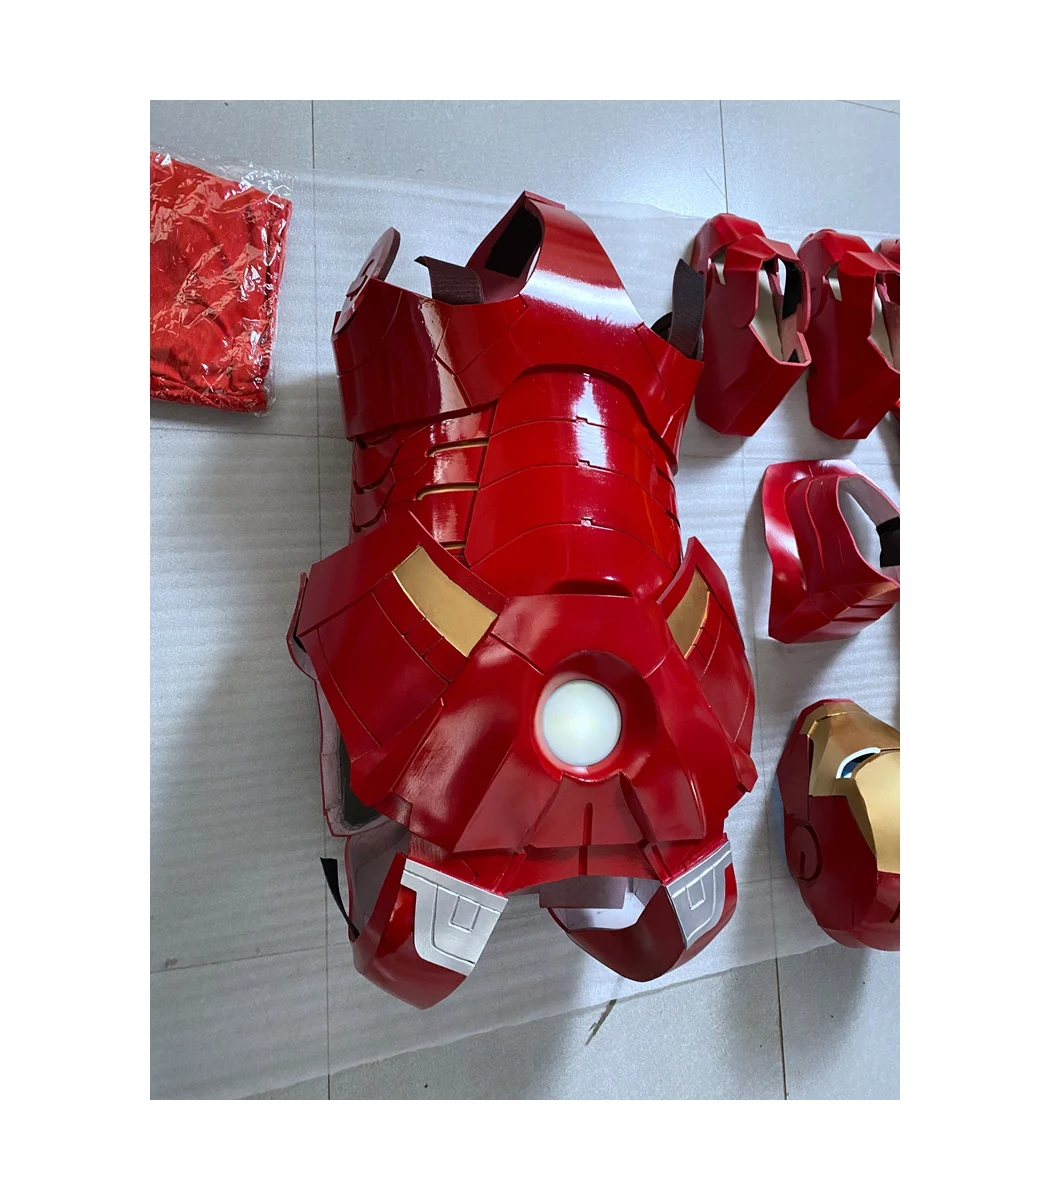 Hot Selling Good Quality Realistic Wearable Figure Cosplay Realistic Adult Costume Adult Robot Toy